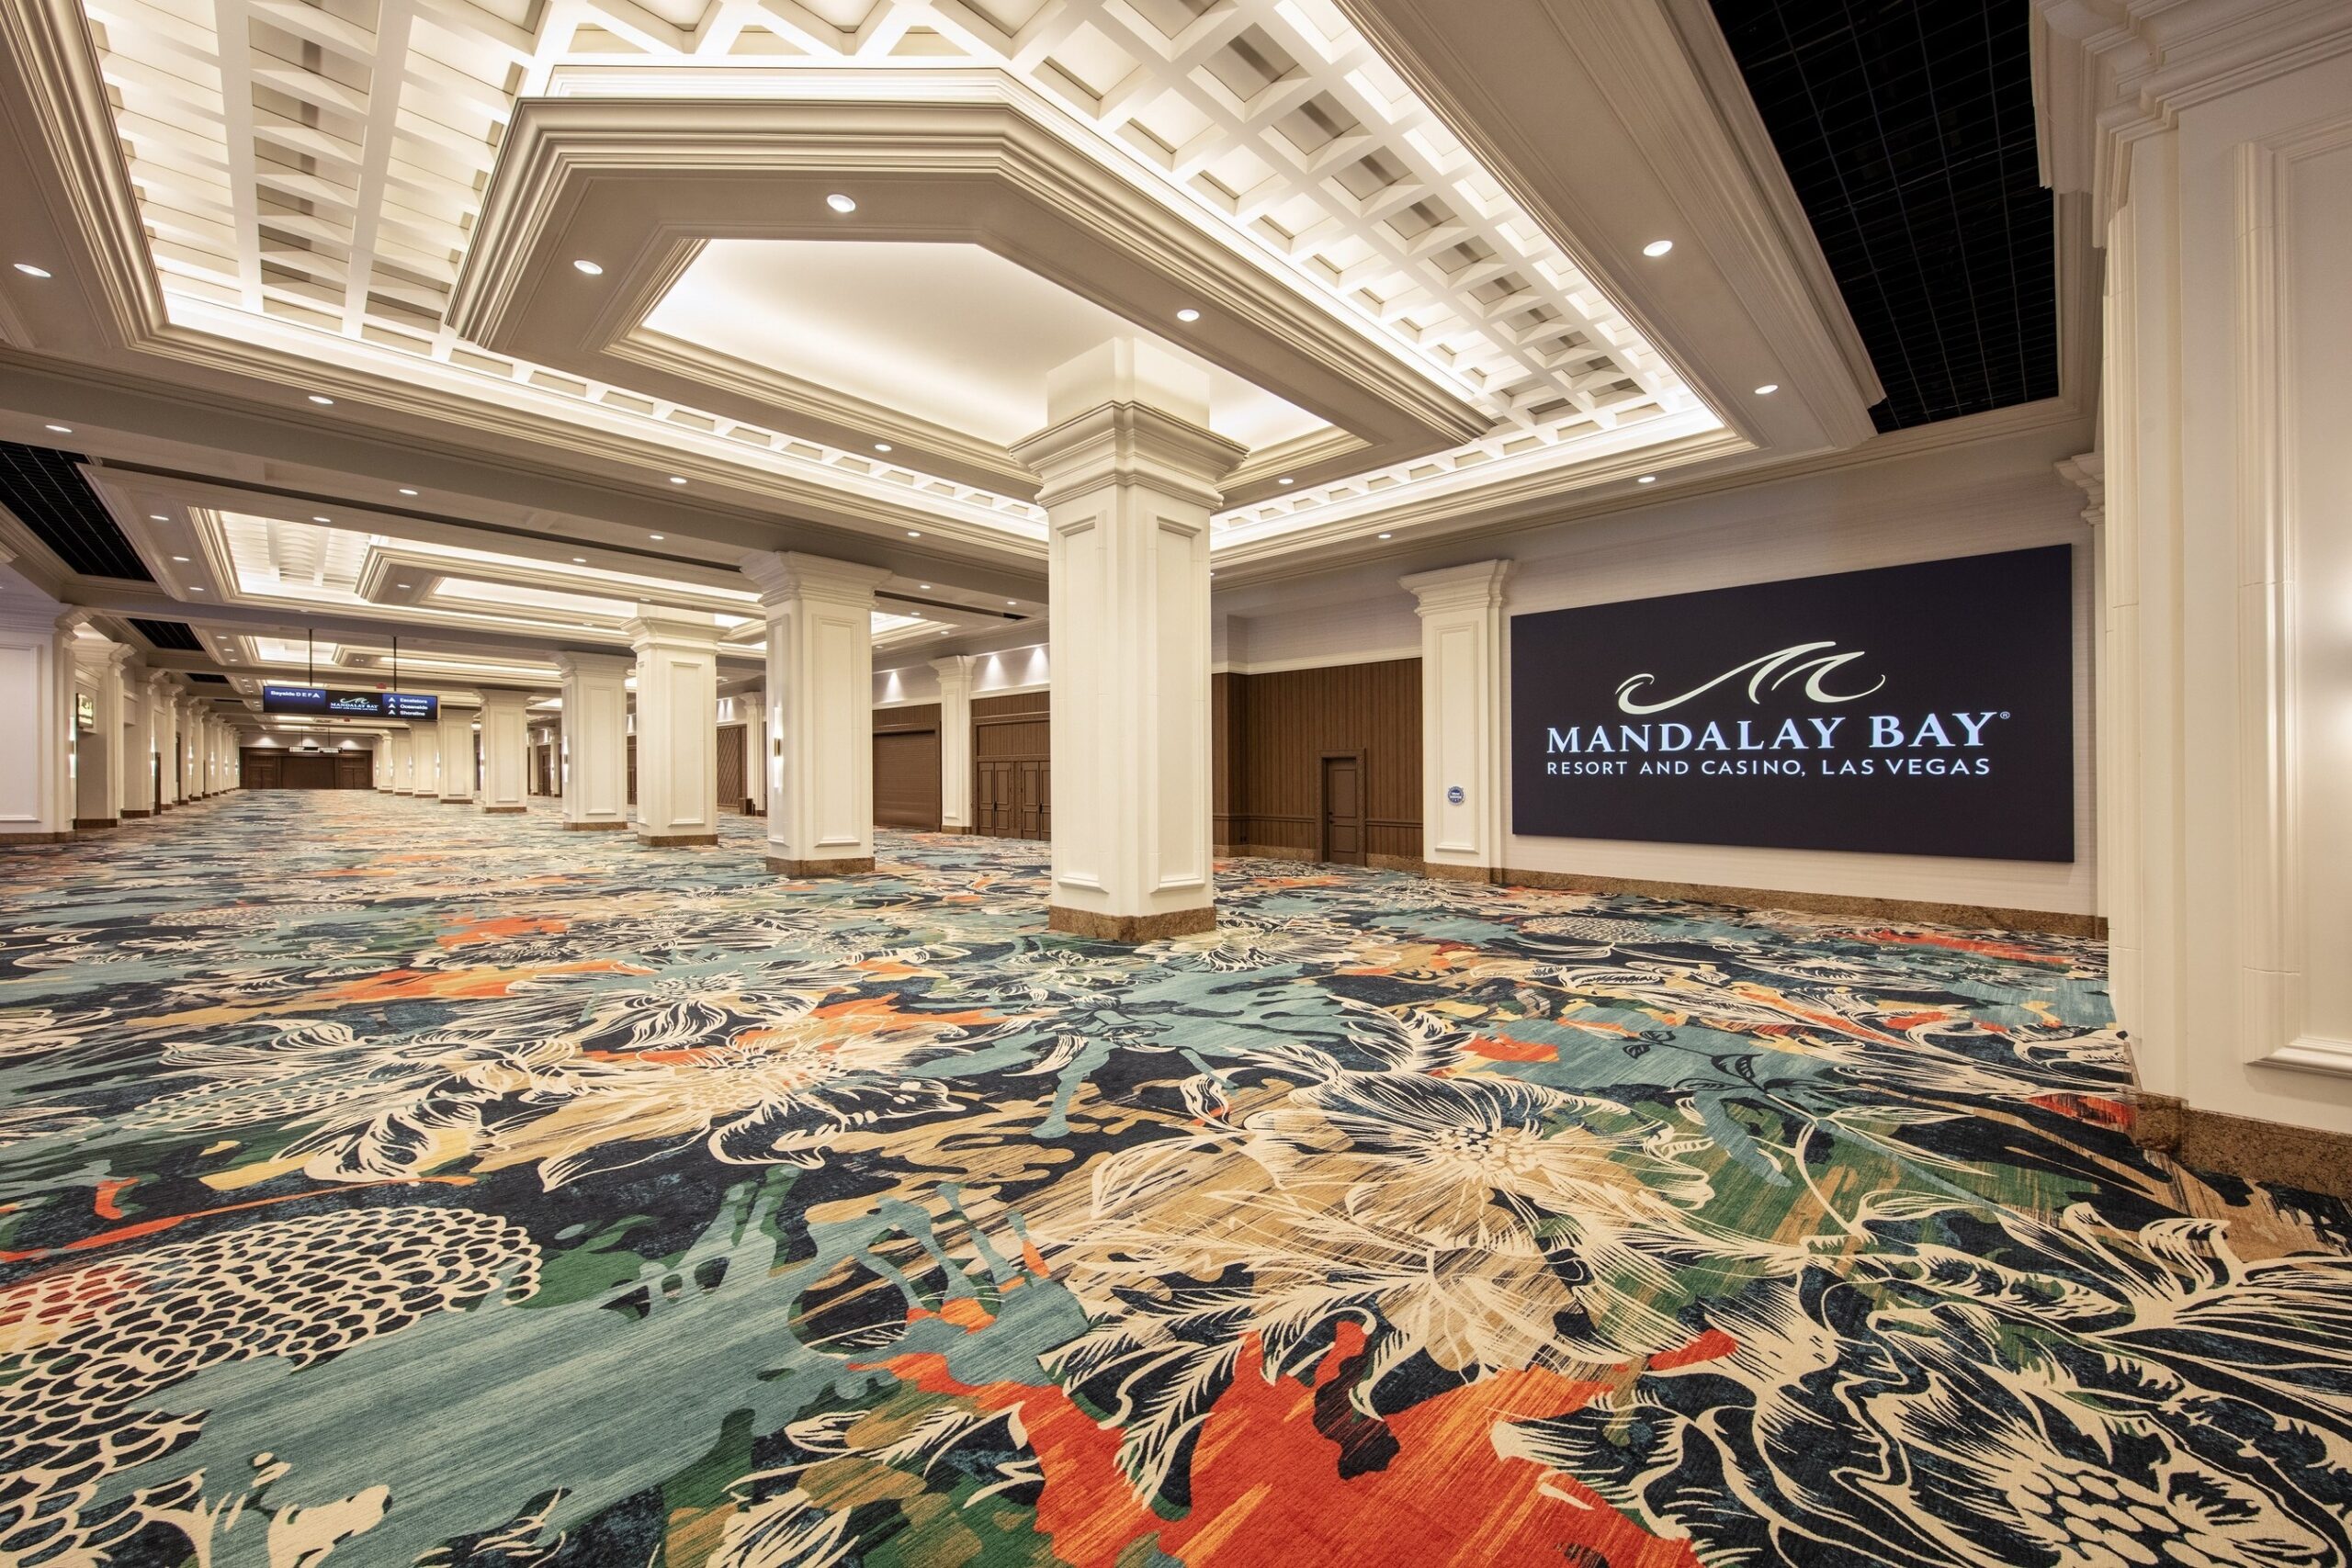 Mandalay Bay unveils its $100M convention center redesign, featuring cutting-edge technology and vibrant, tropical-inspired design, enhancing the modern meetings and events experience.